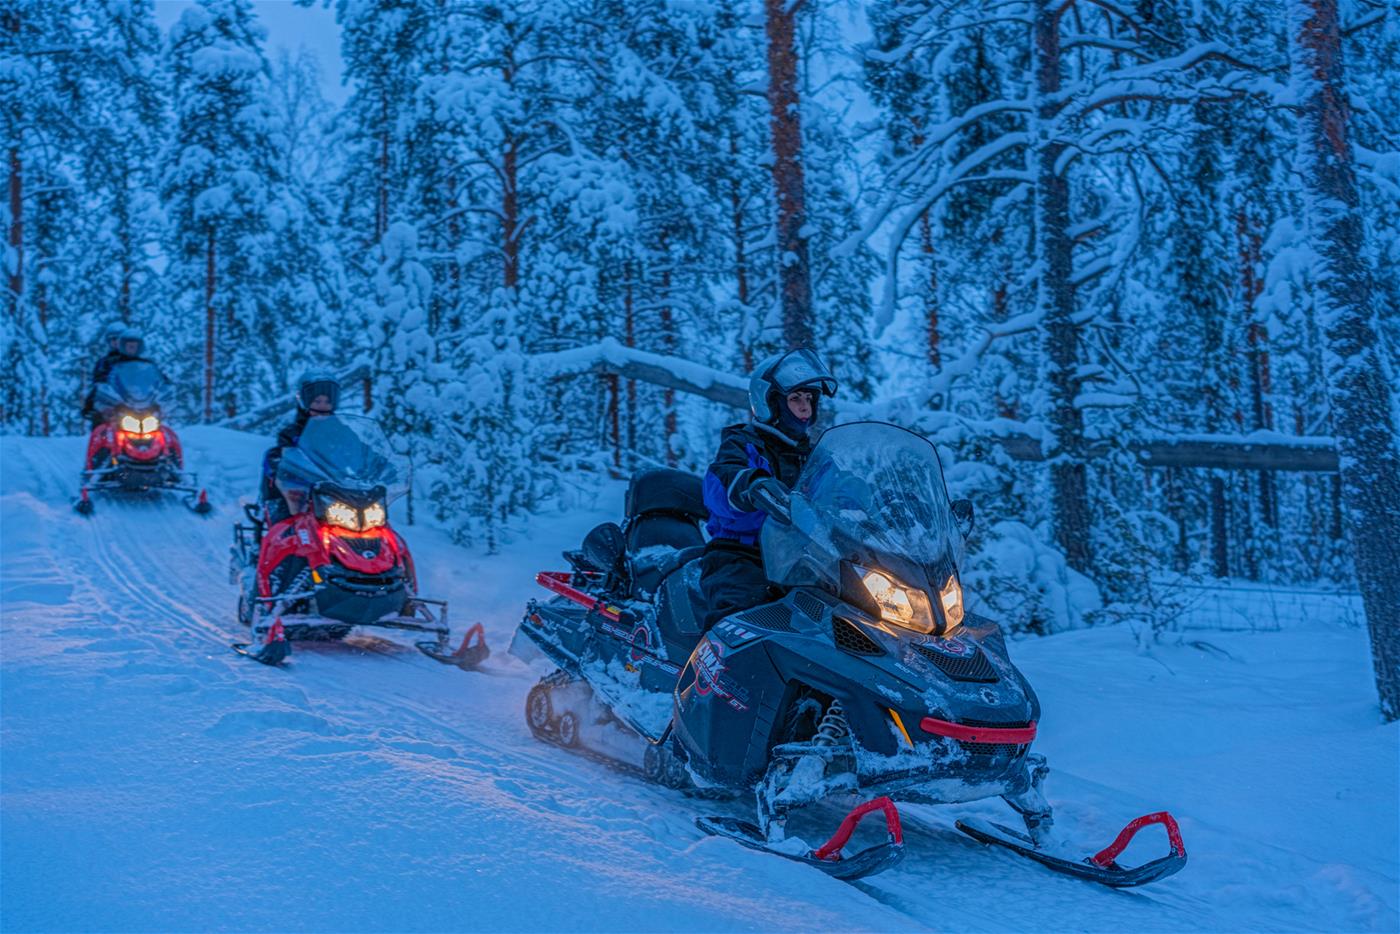 In winter it's time for some action! Join a snowmobile safari!